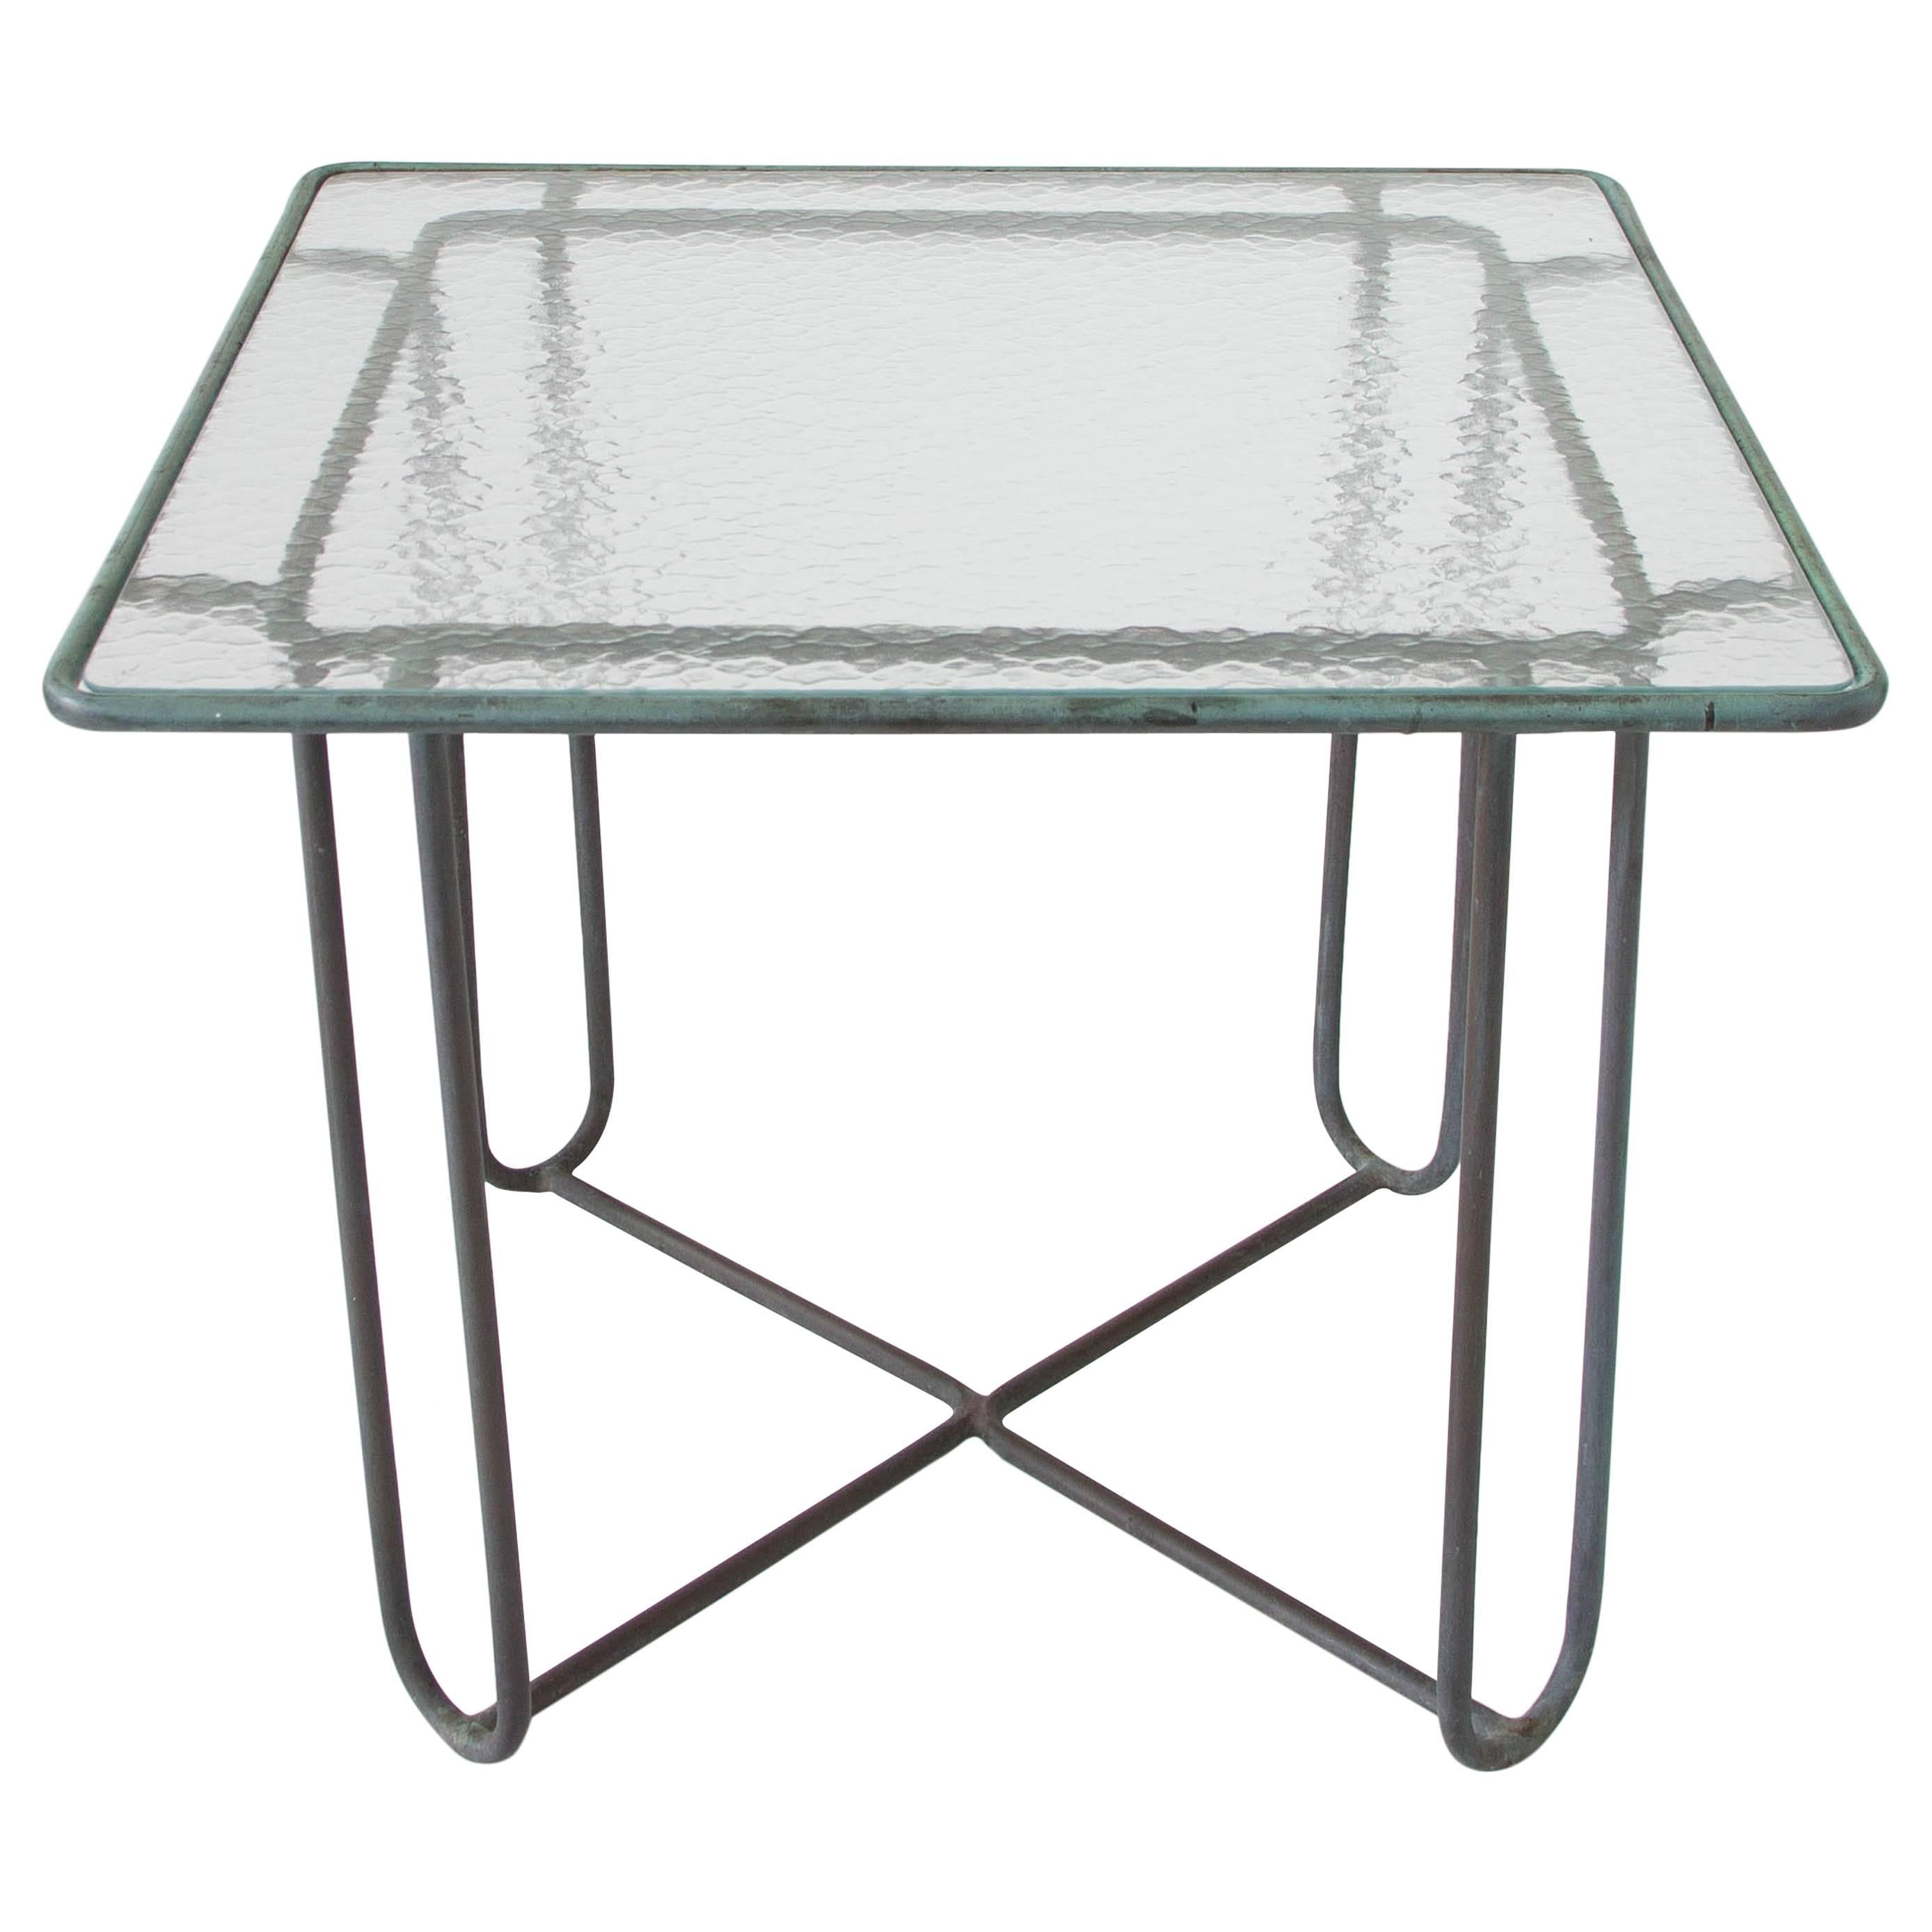 Walter Lamb Square Patio Dining Table